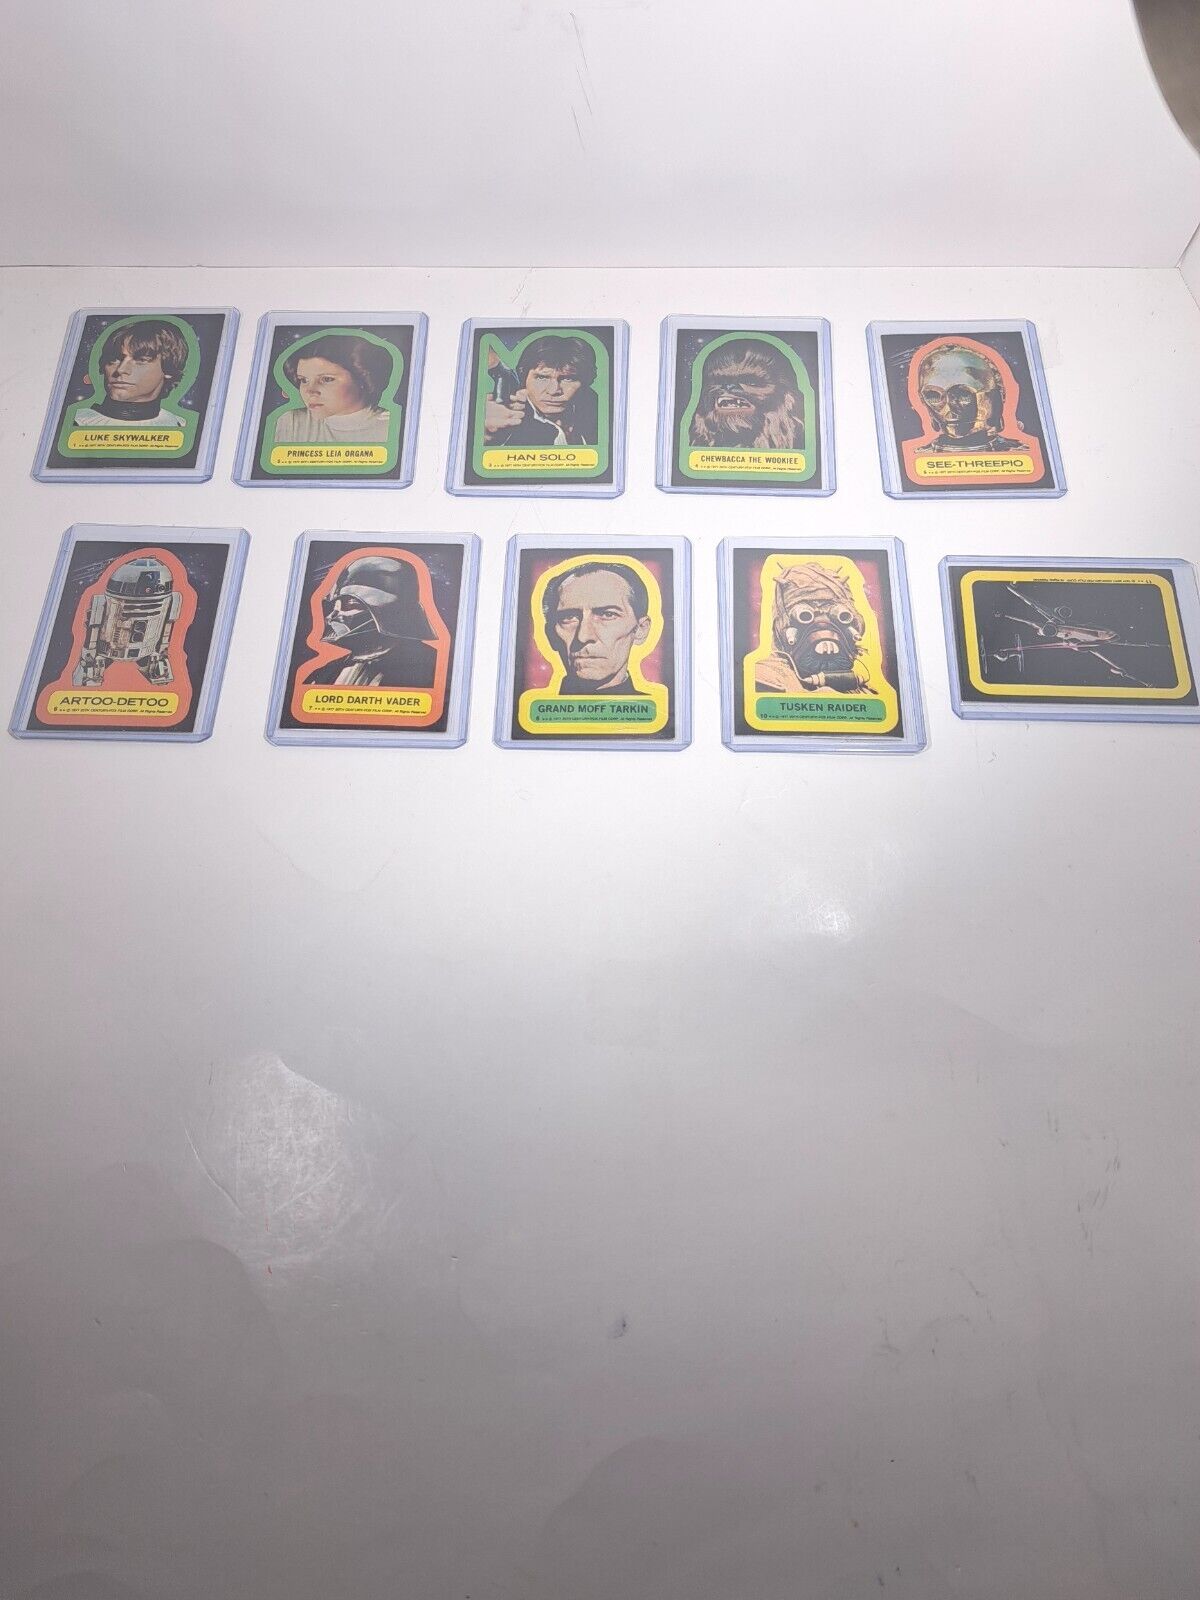 1977 Vintage Star Wars Sticker Cards-10 cards total with 2 protective sleeves